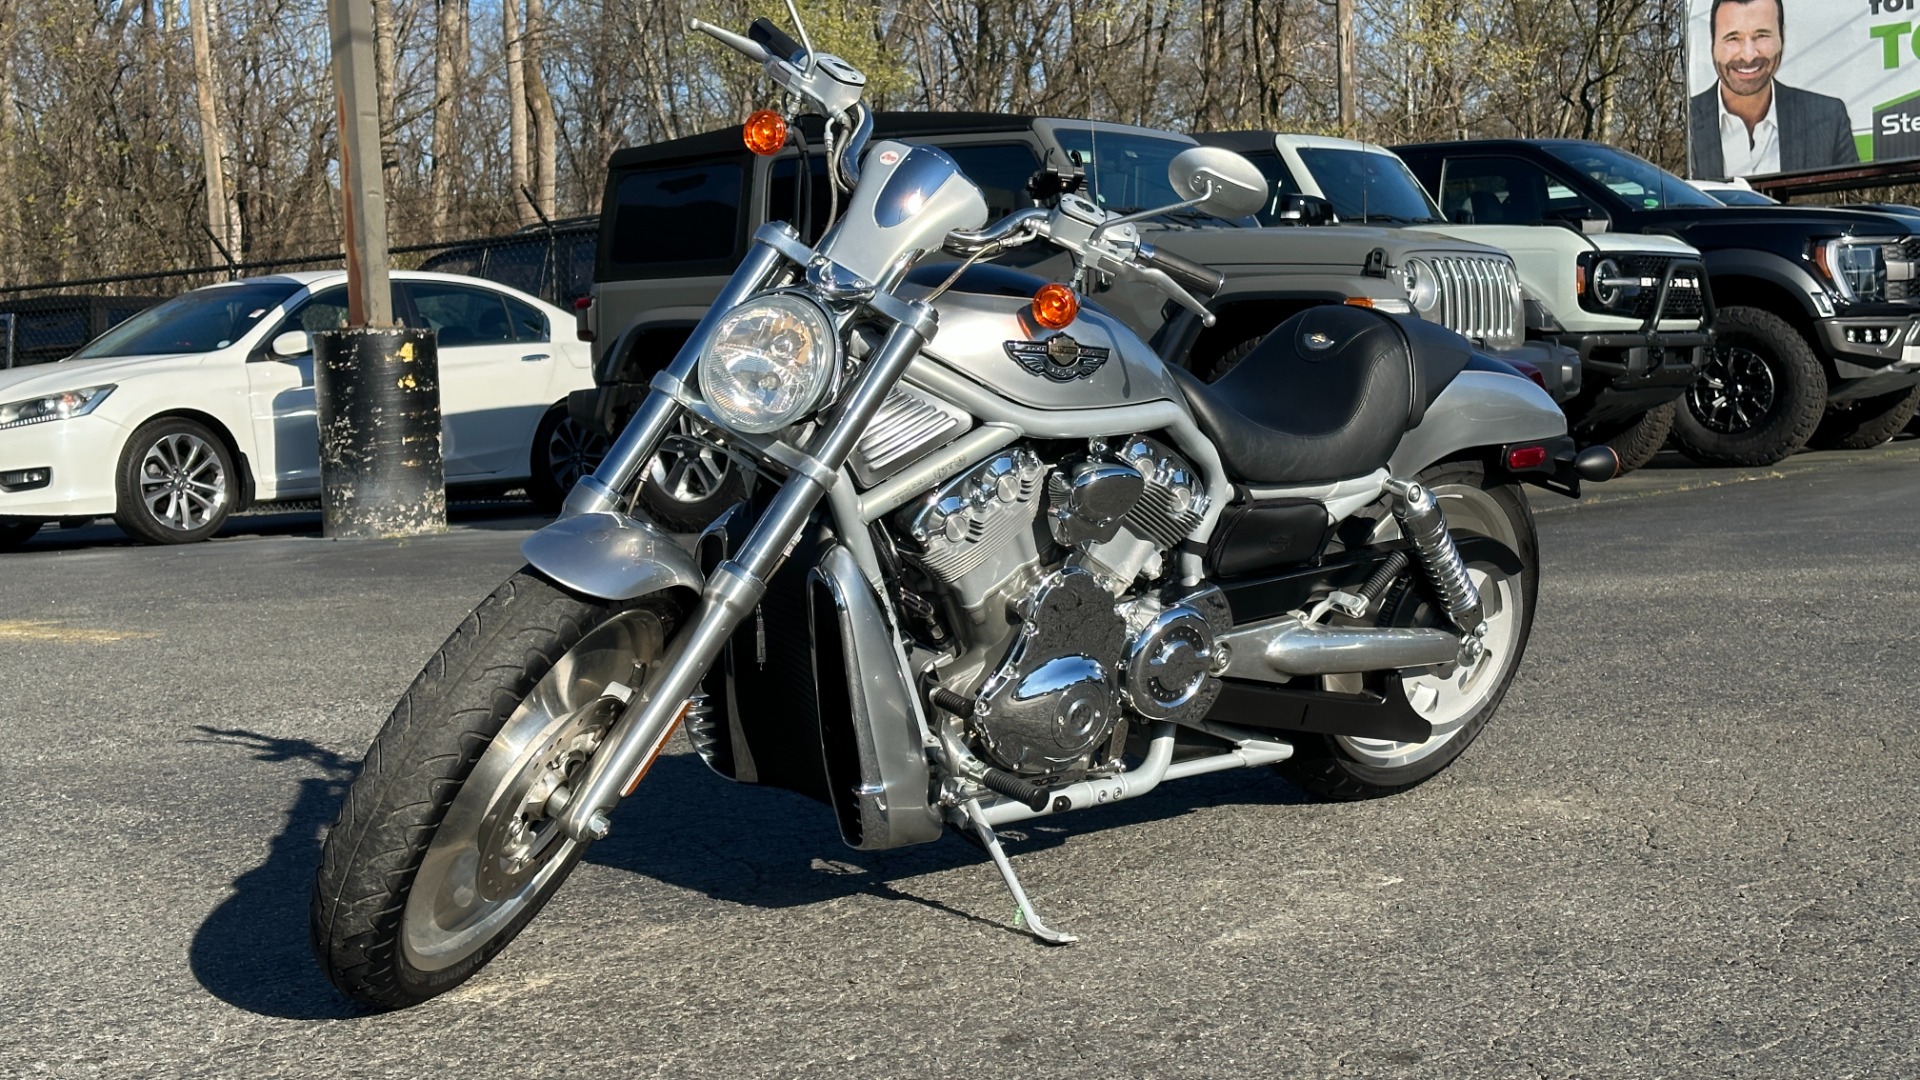 Used 2003 Harley Davidson V Rod ANNIVERSARY EDITION / 1130CC ENGINE / BREMBO BRAKES / VORTEX AIR SCOOPS for sale $7,995 at Formula Imports in Charlotte NC 28227 55